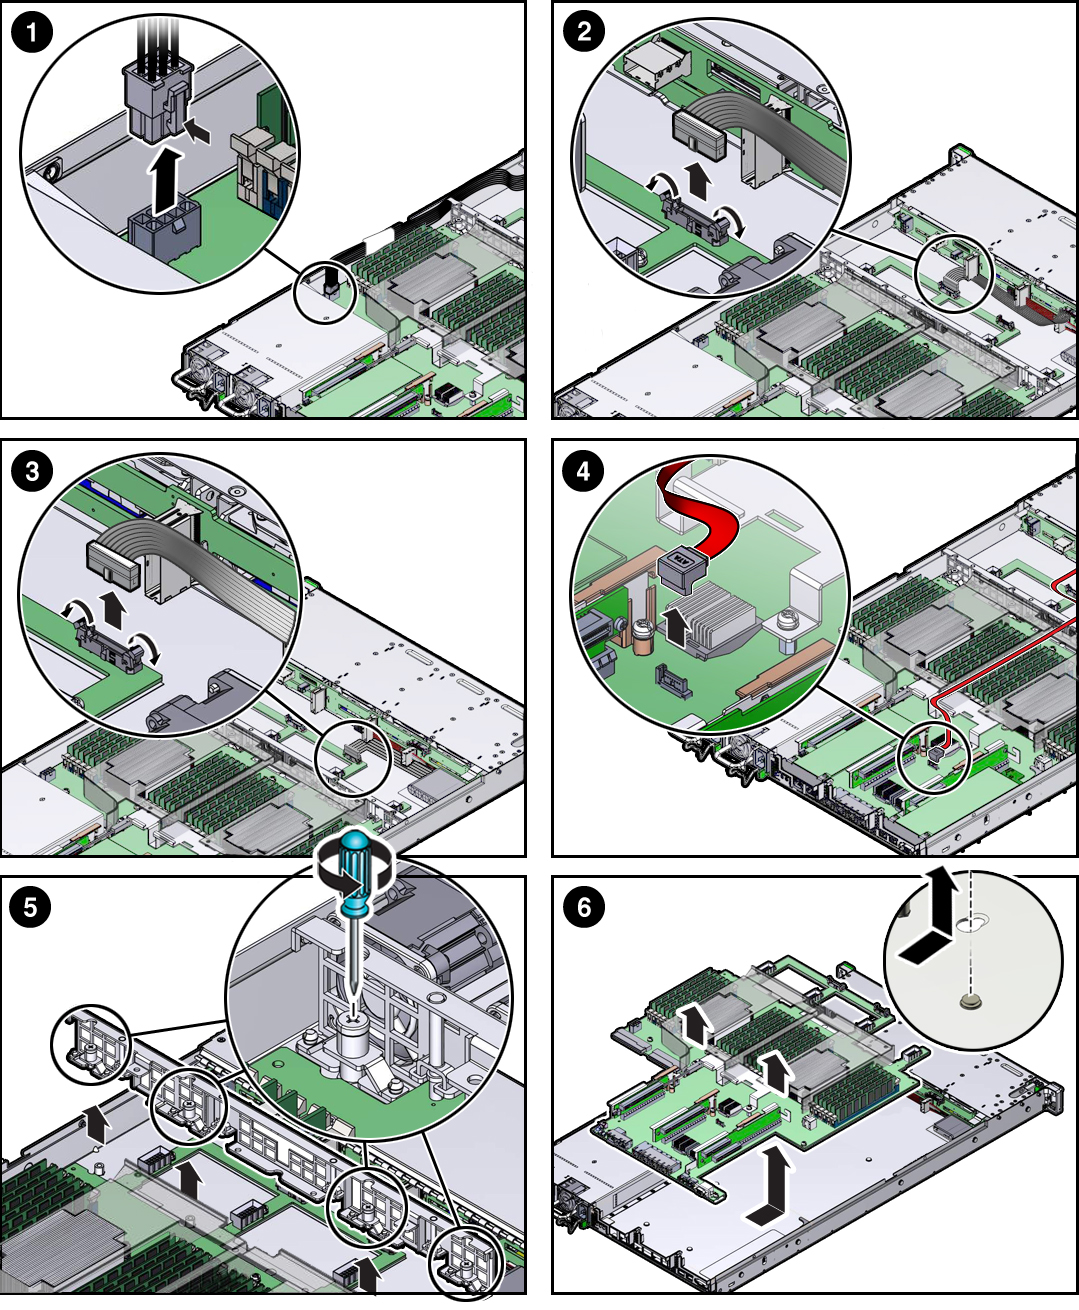 image:Figure showing how to remove the motherboard from the                                 server.